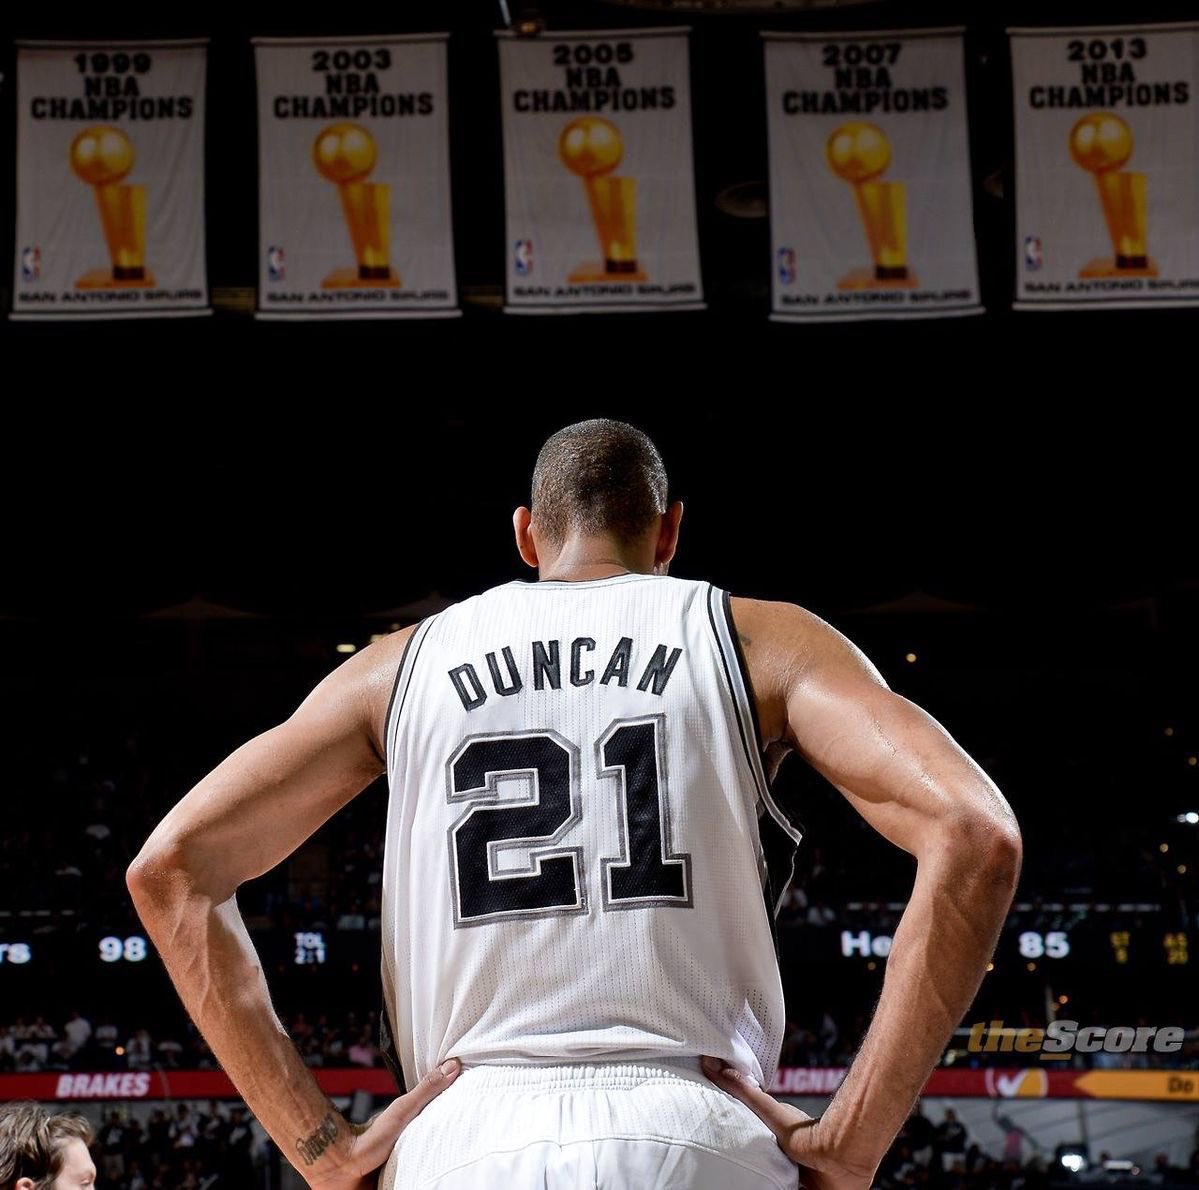 Join us in wishing a Happy 48th Birthday to 15x #NBAAllStar, 5x NBA Champion, 3x NBA Finals MVP and 75th Anniversary Team member... Tim Duncan!